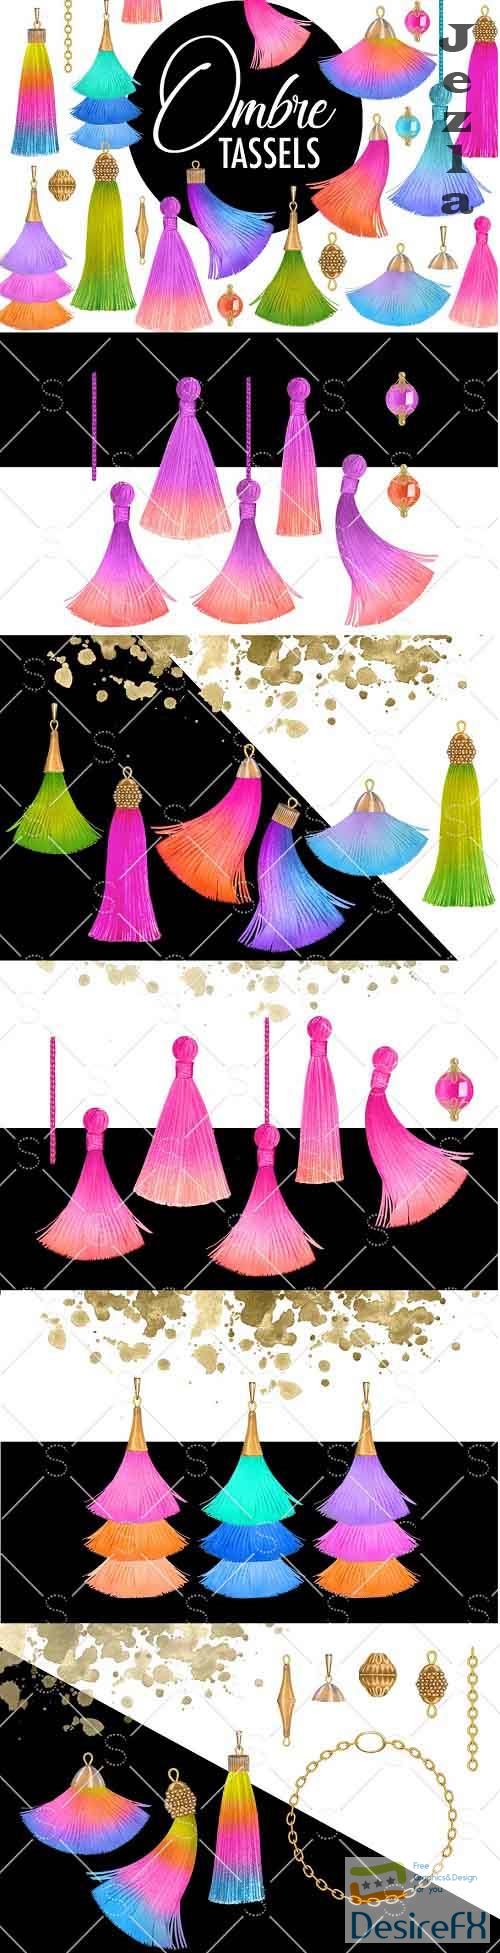 Ombre Tassels - 3096607